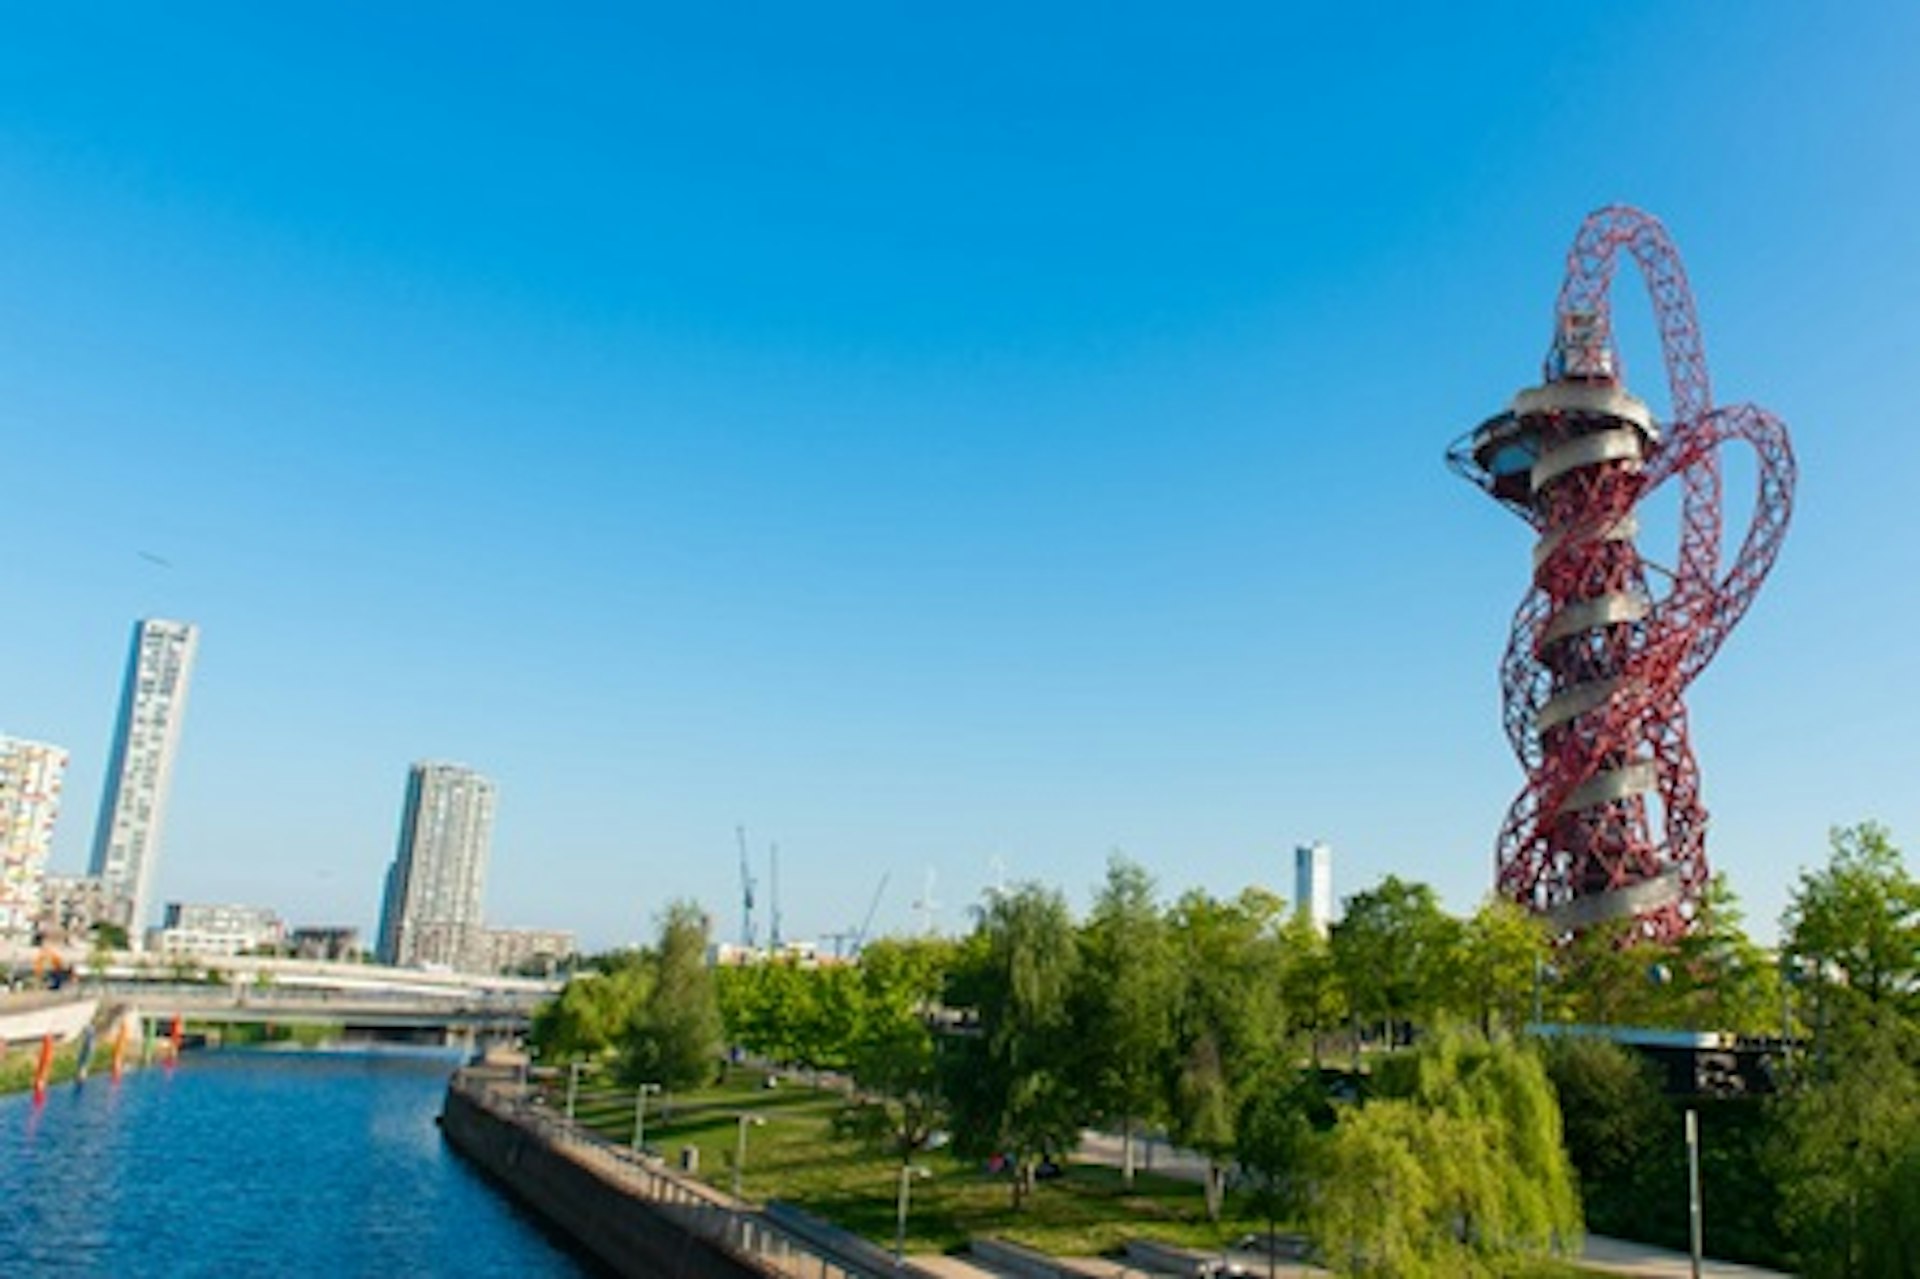 The Slide at The ArcelorMittal Orbit for Two with a Bottle of Prosecco 2